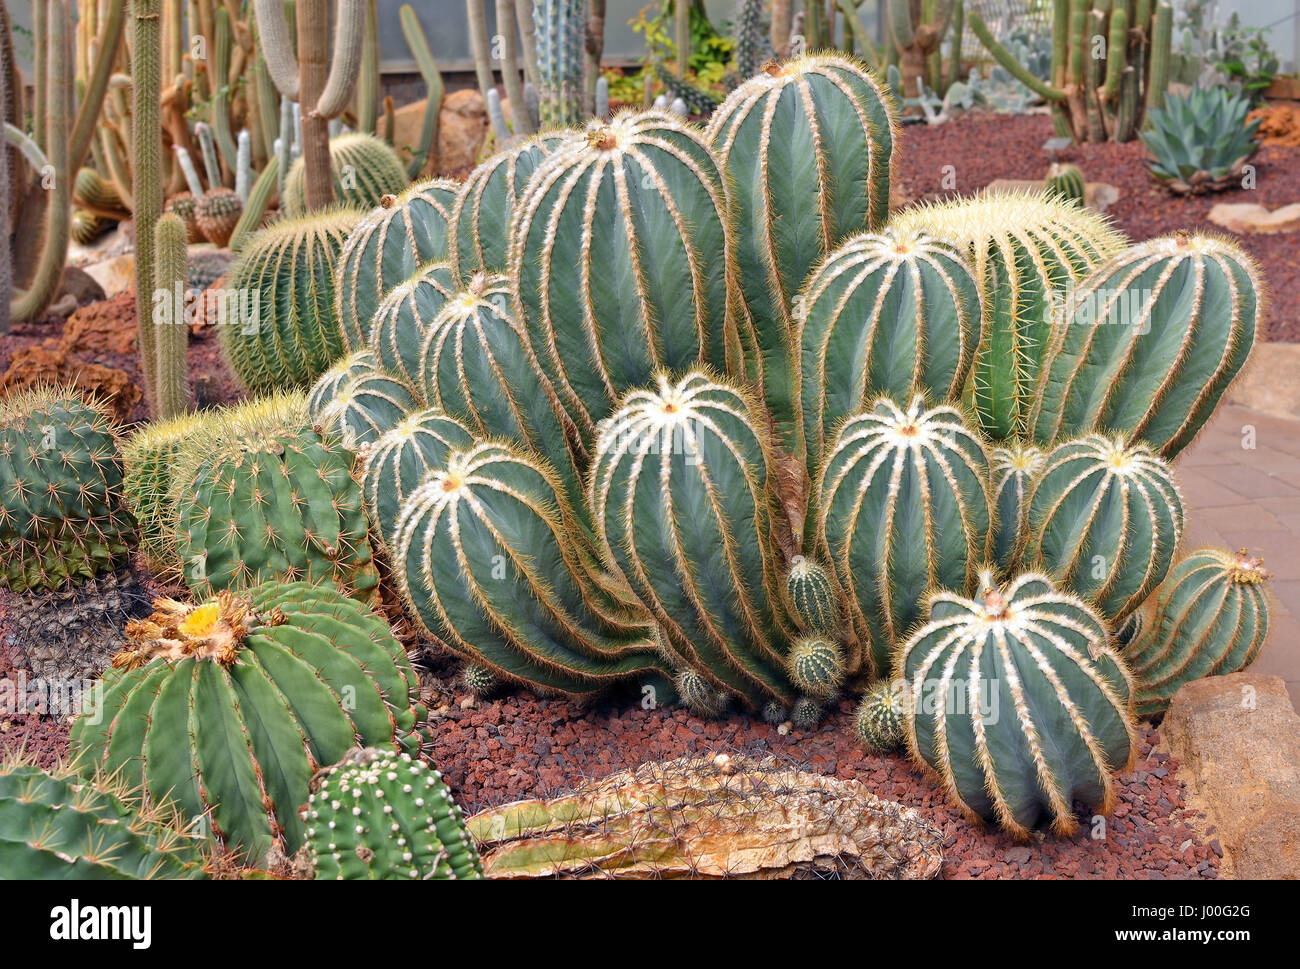 Ball cactus, Parodia magnifica, and assorted other cacti growing in a glasshouse Stock Photo